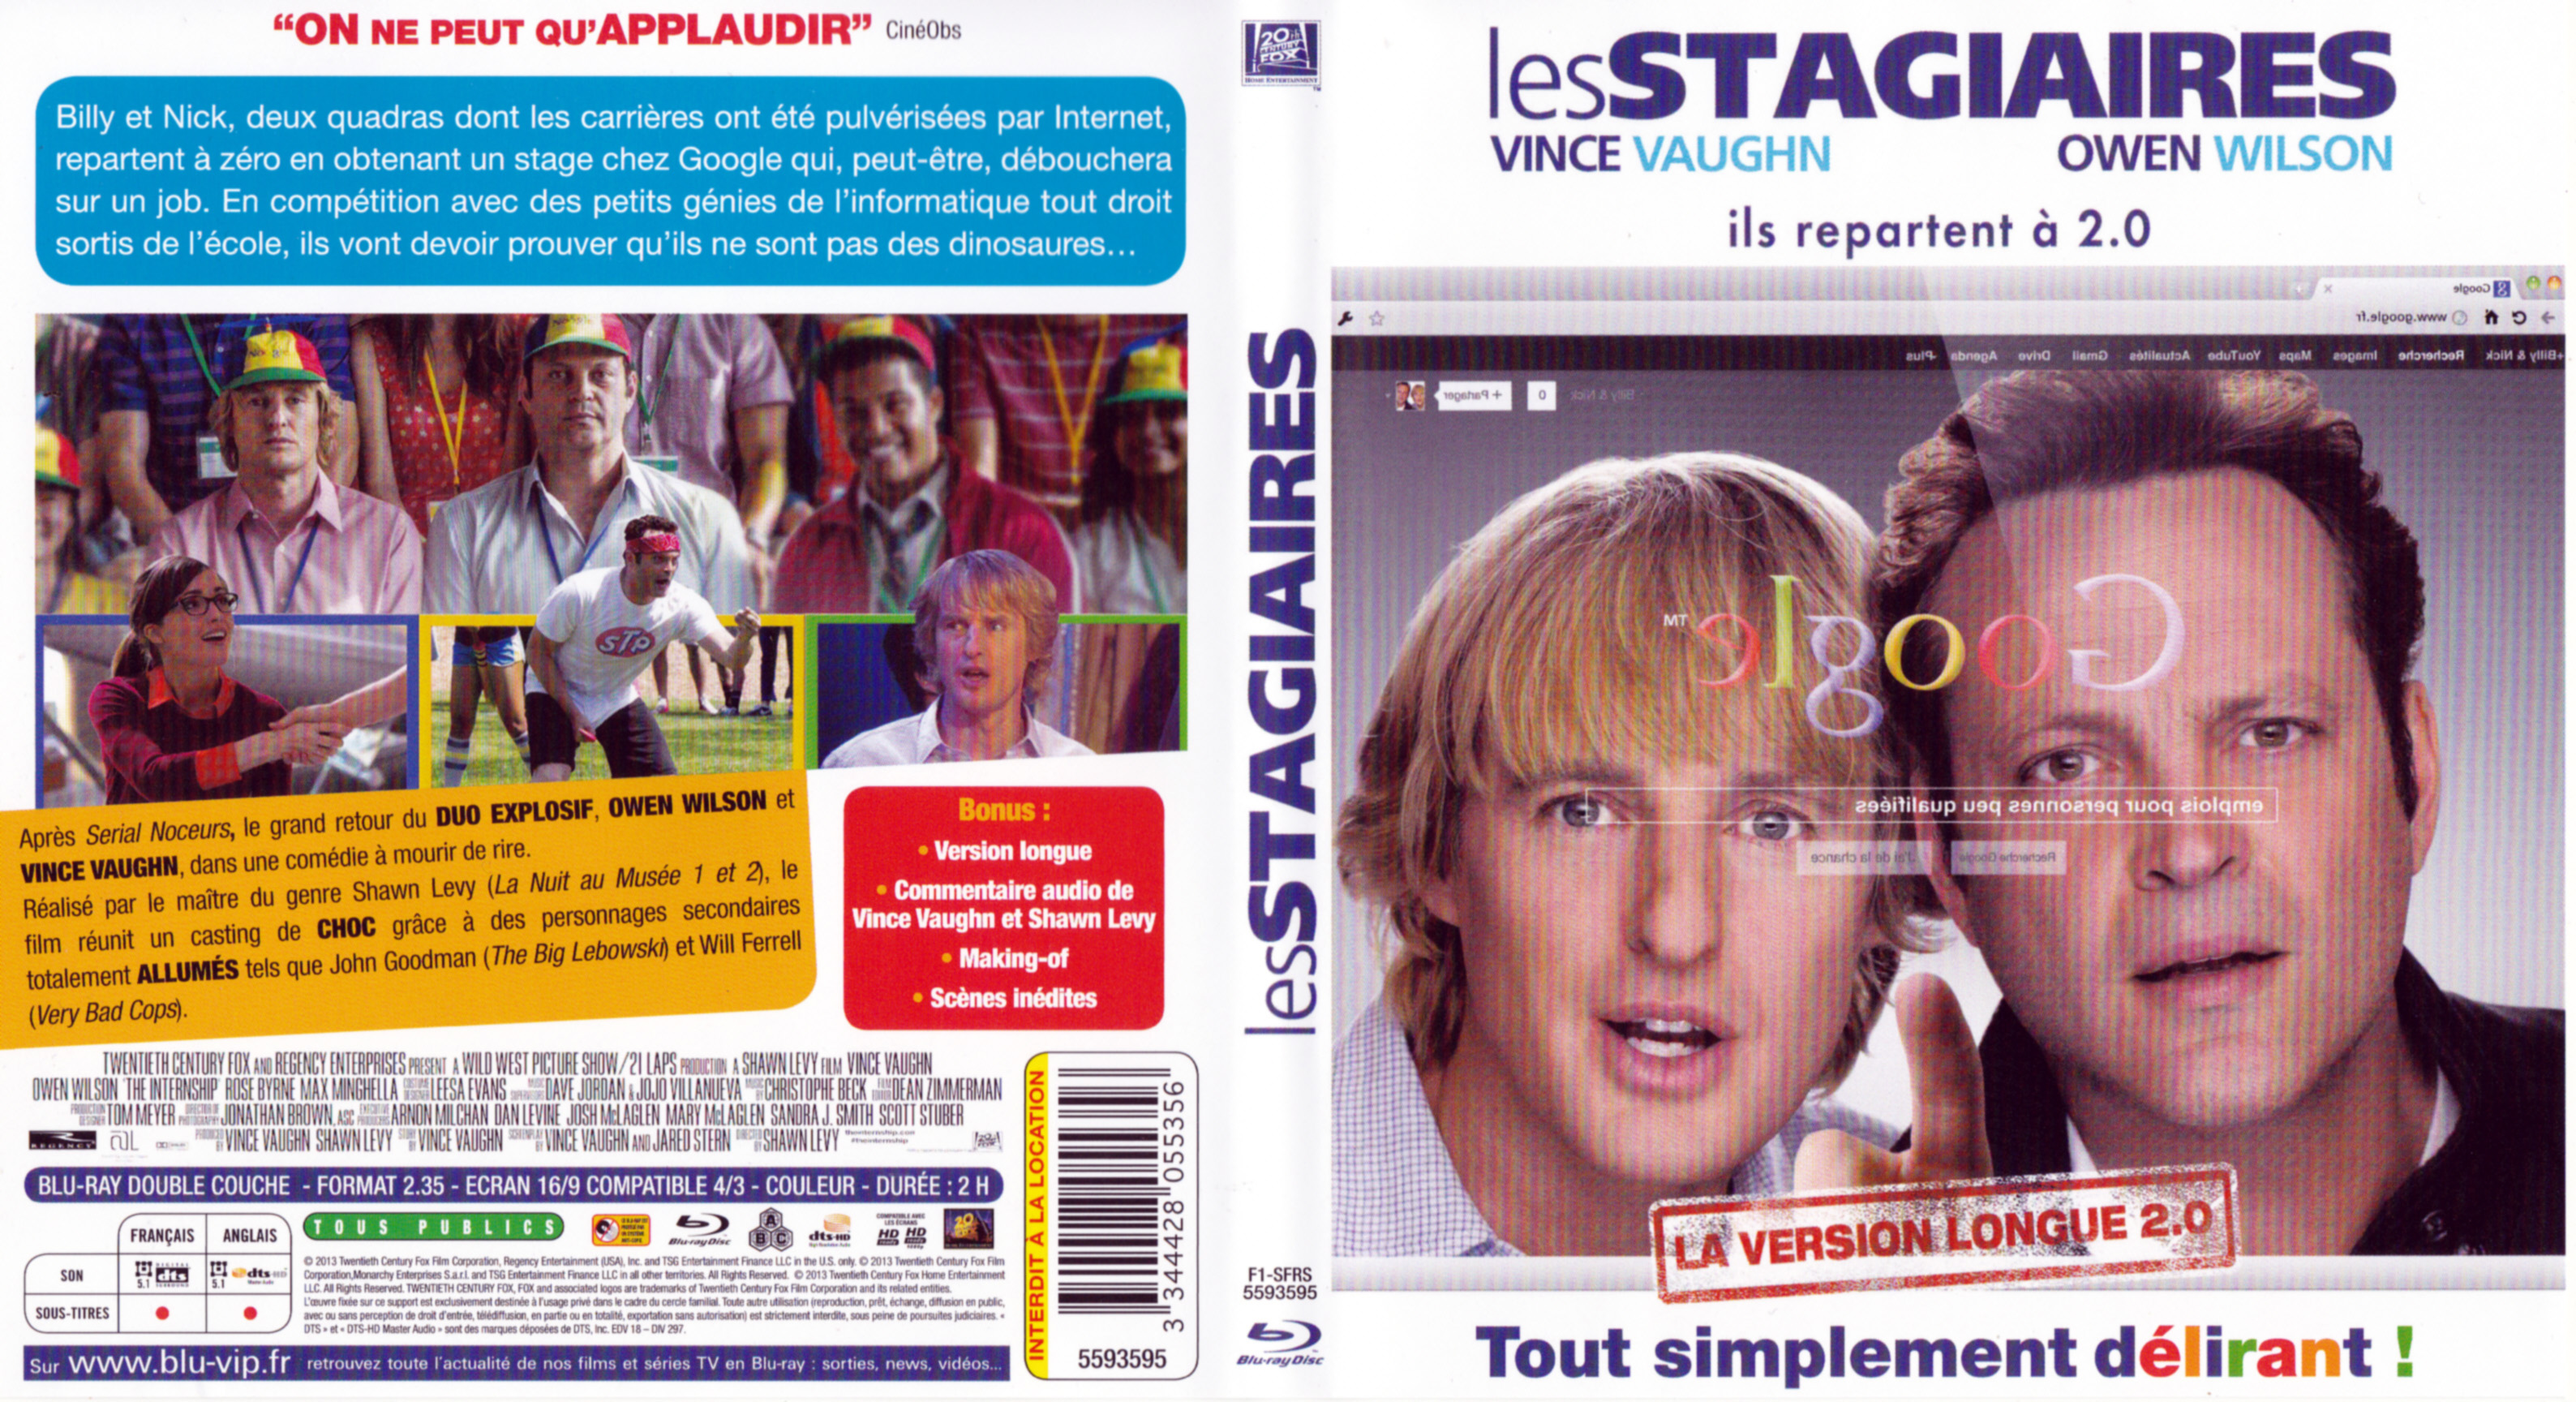 Jaquette DVD Les stagiaires (BLU-RAY)